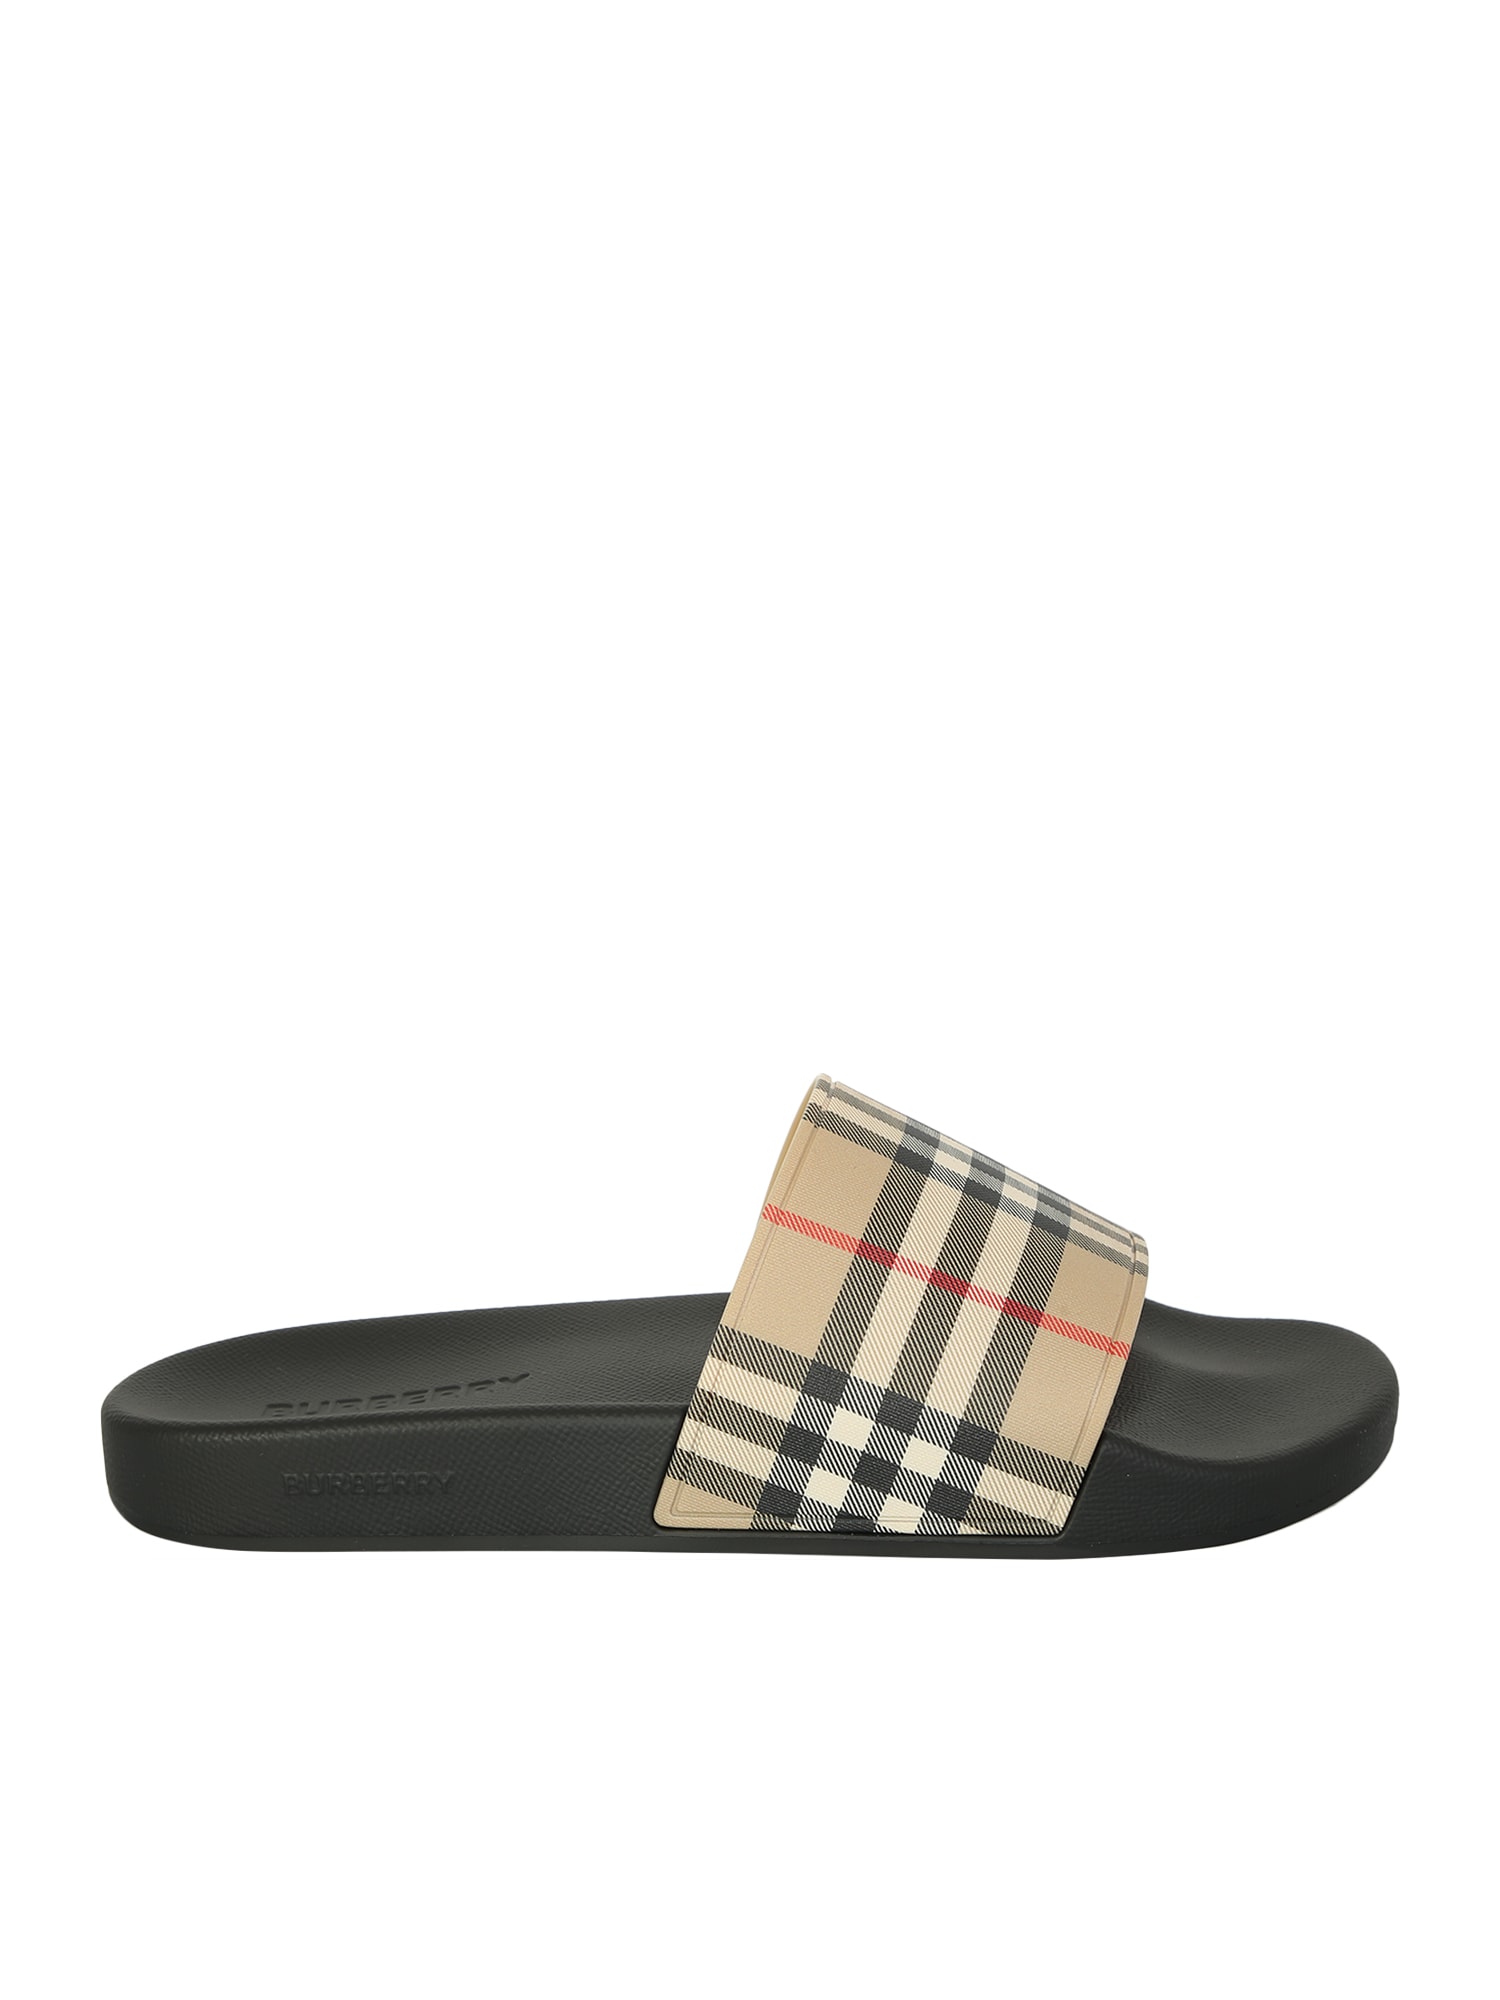 Burberry Contemporary, Cool And Vintage For The Checked Logo. Pool Slides Give A Casual Touch To The Look